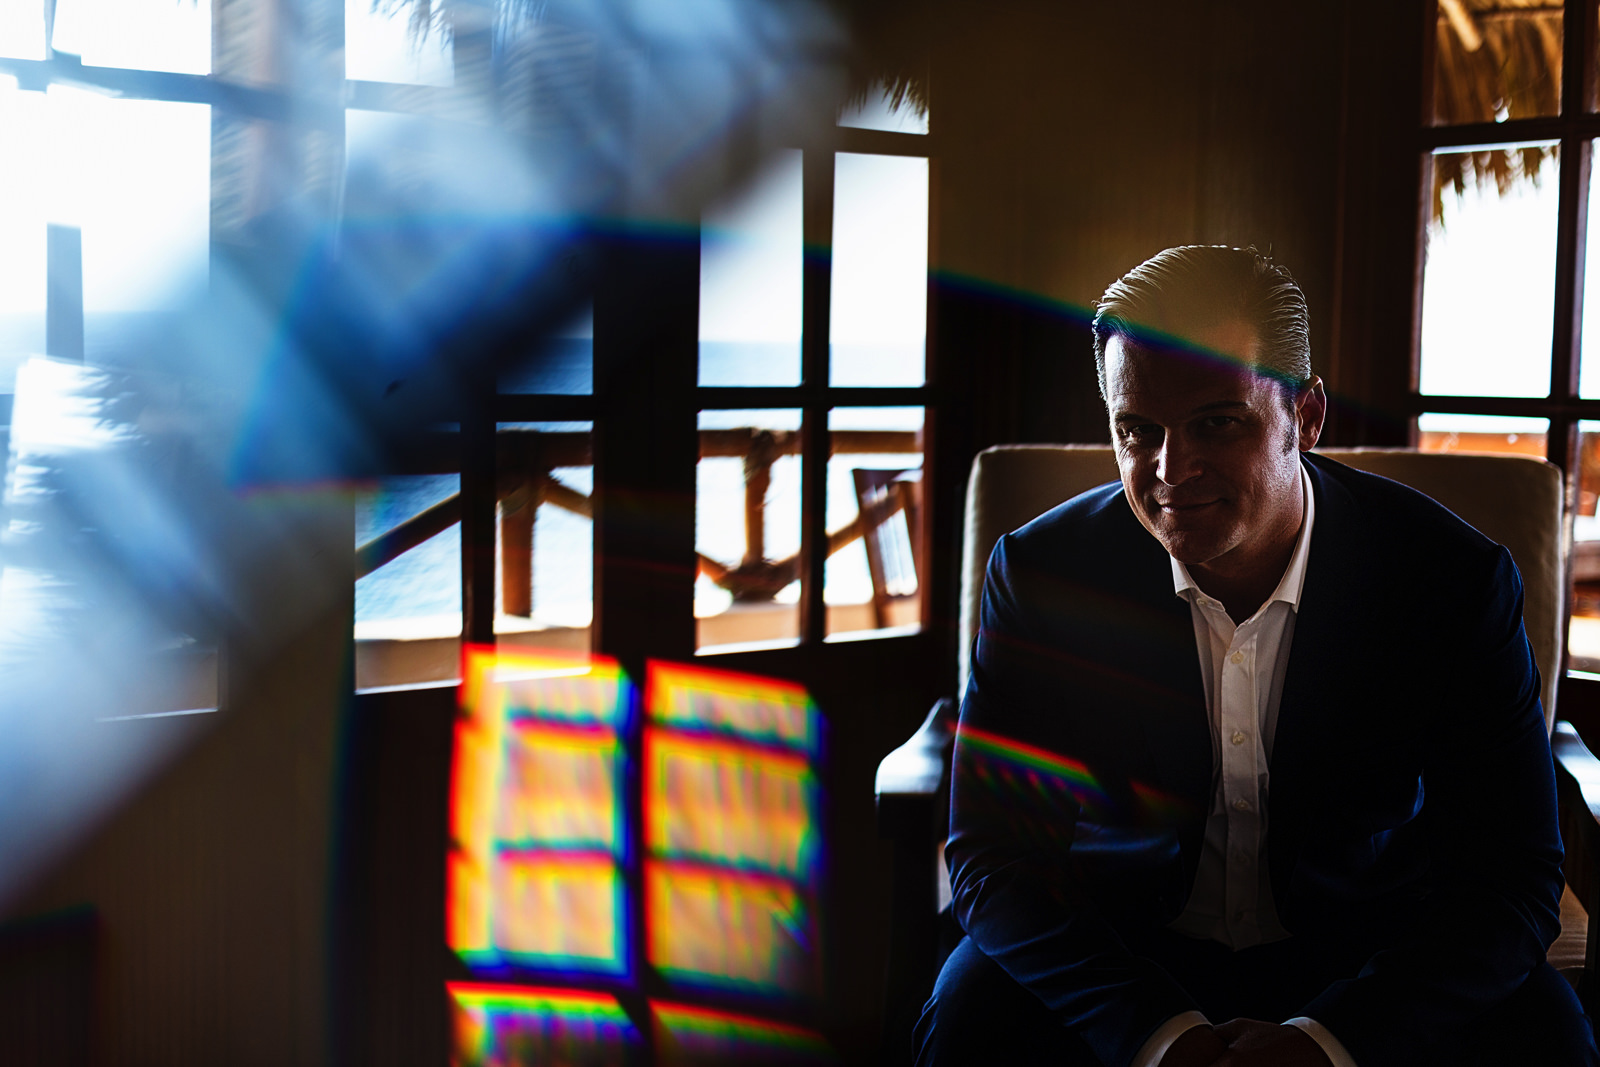 Portrait of the groom with some light effects from a prism